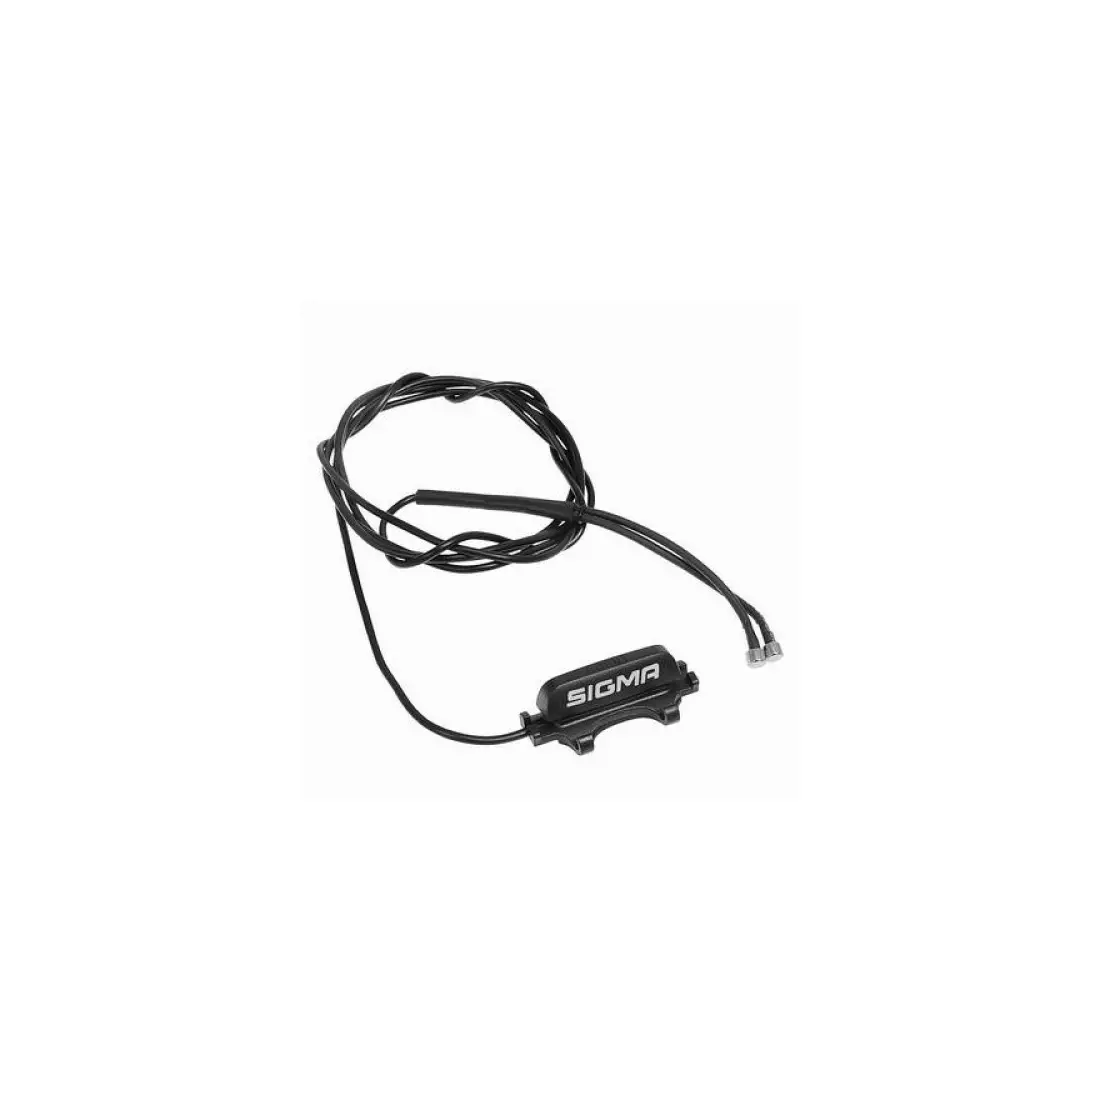 SIGMA cable for bicycle computers BC black